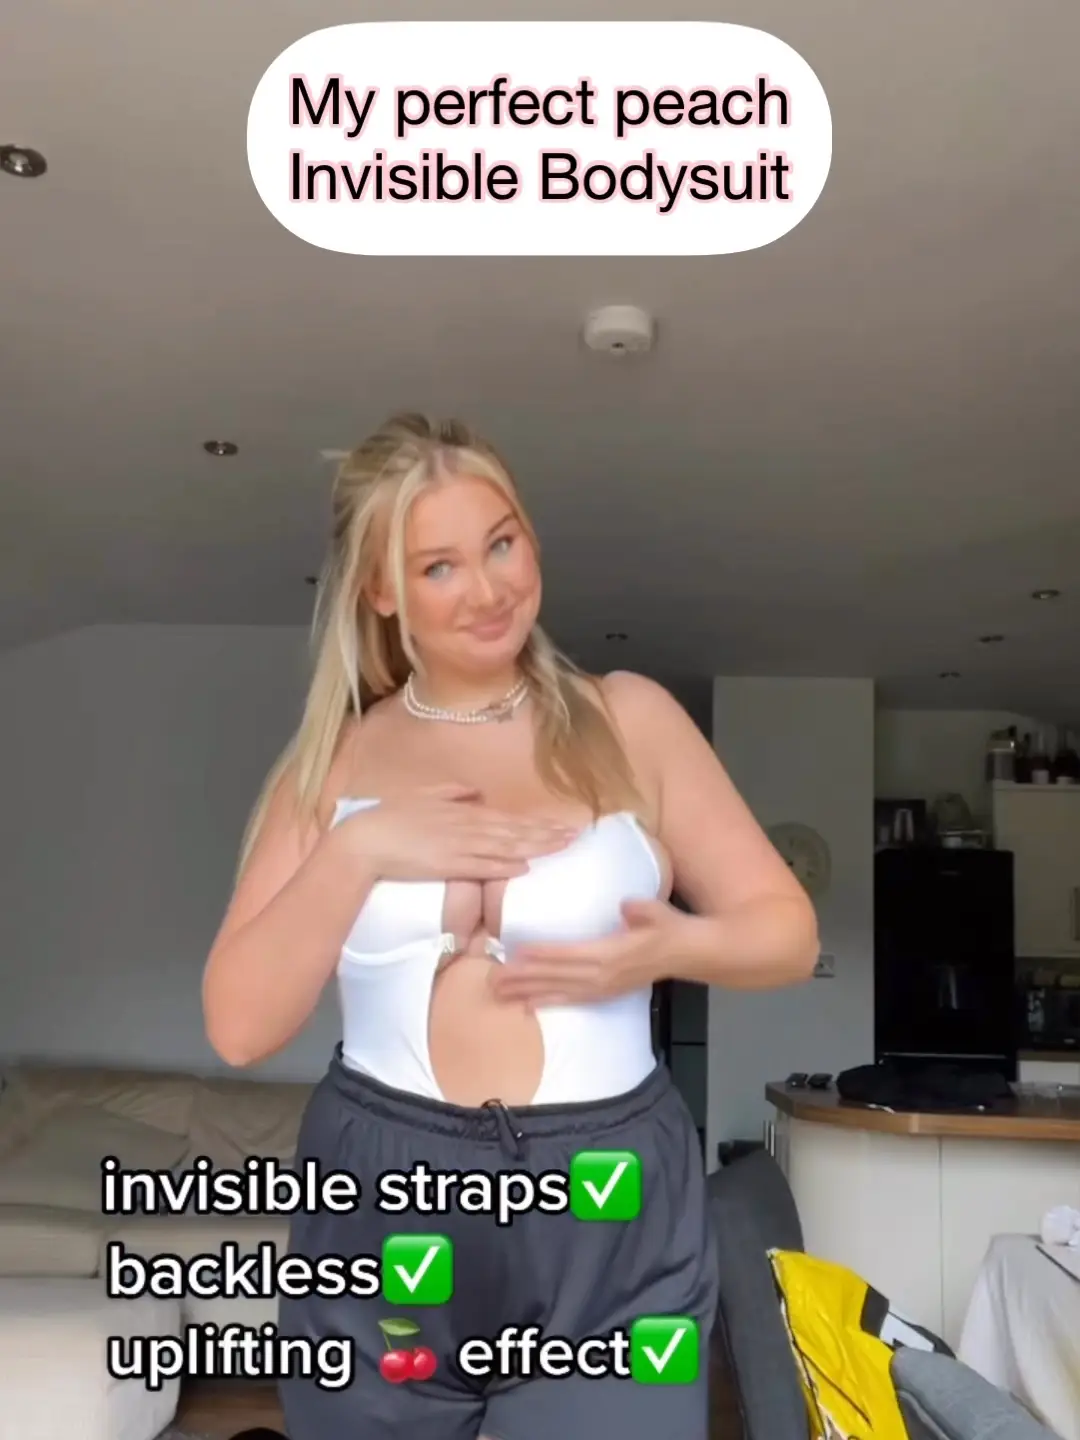 Invisible Bodysuit Shapewear 🍑, Video published by MyPerfectPeach